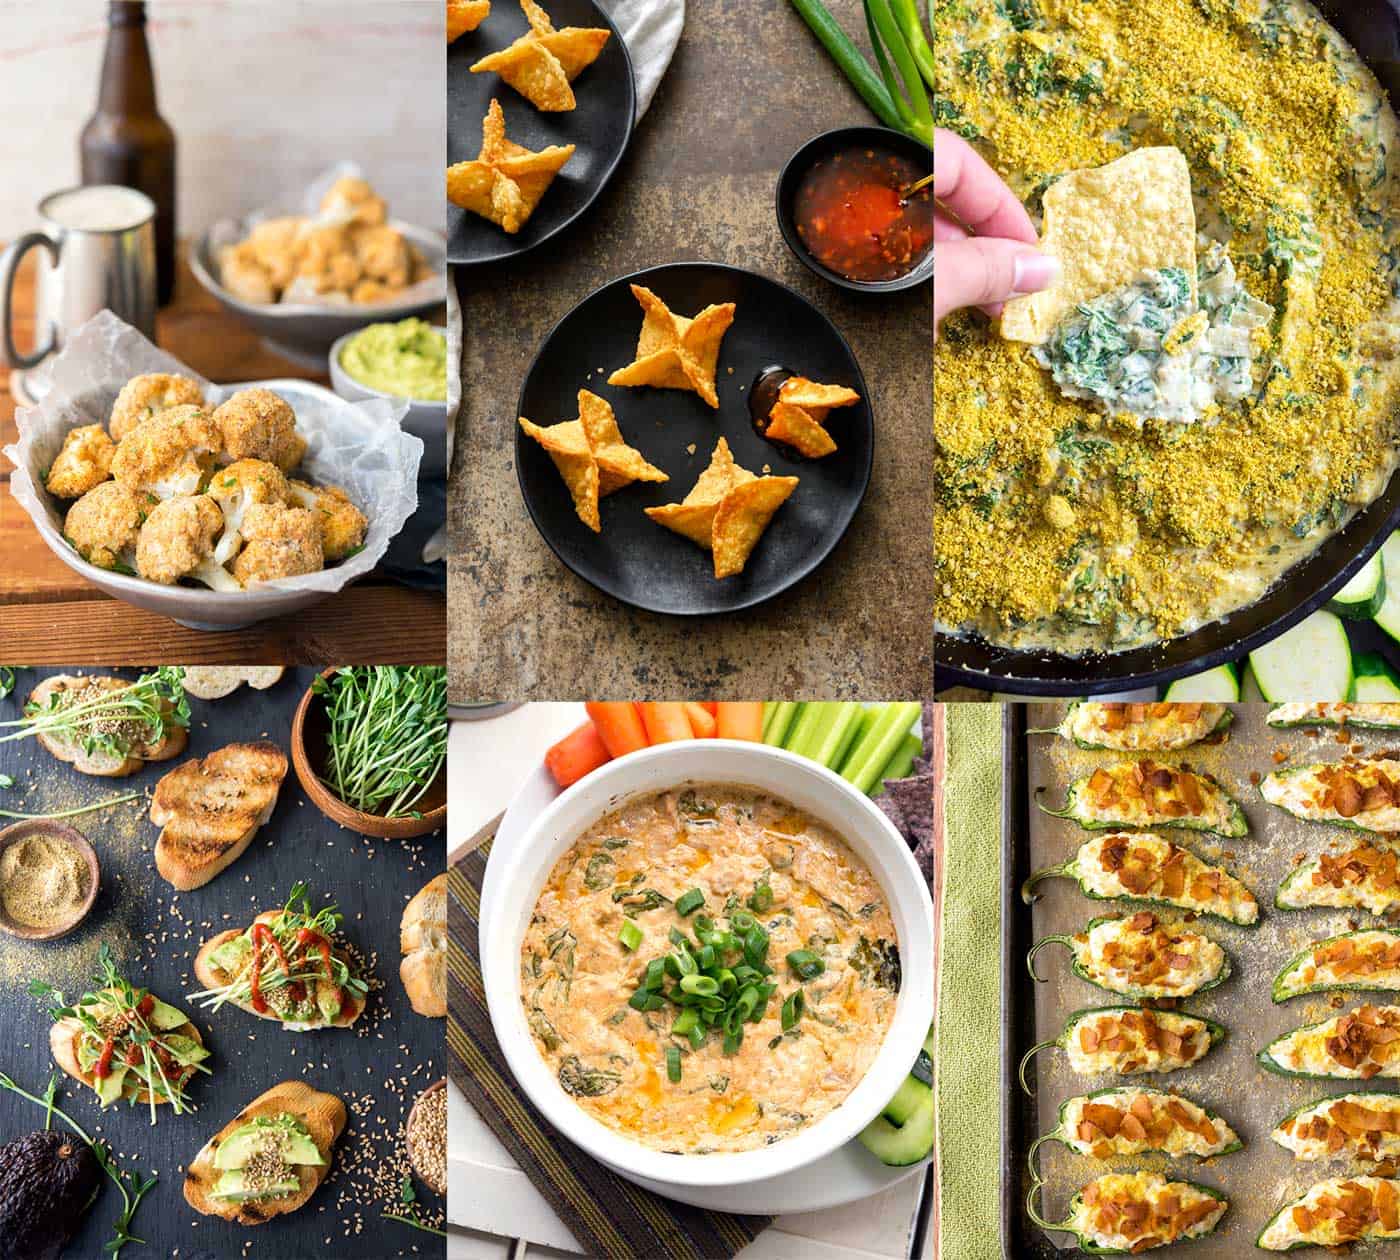 Image collage of several vegan appetizers including crostini, dip, baked cauliflower, and jalapeño poppers